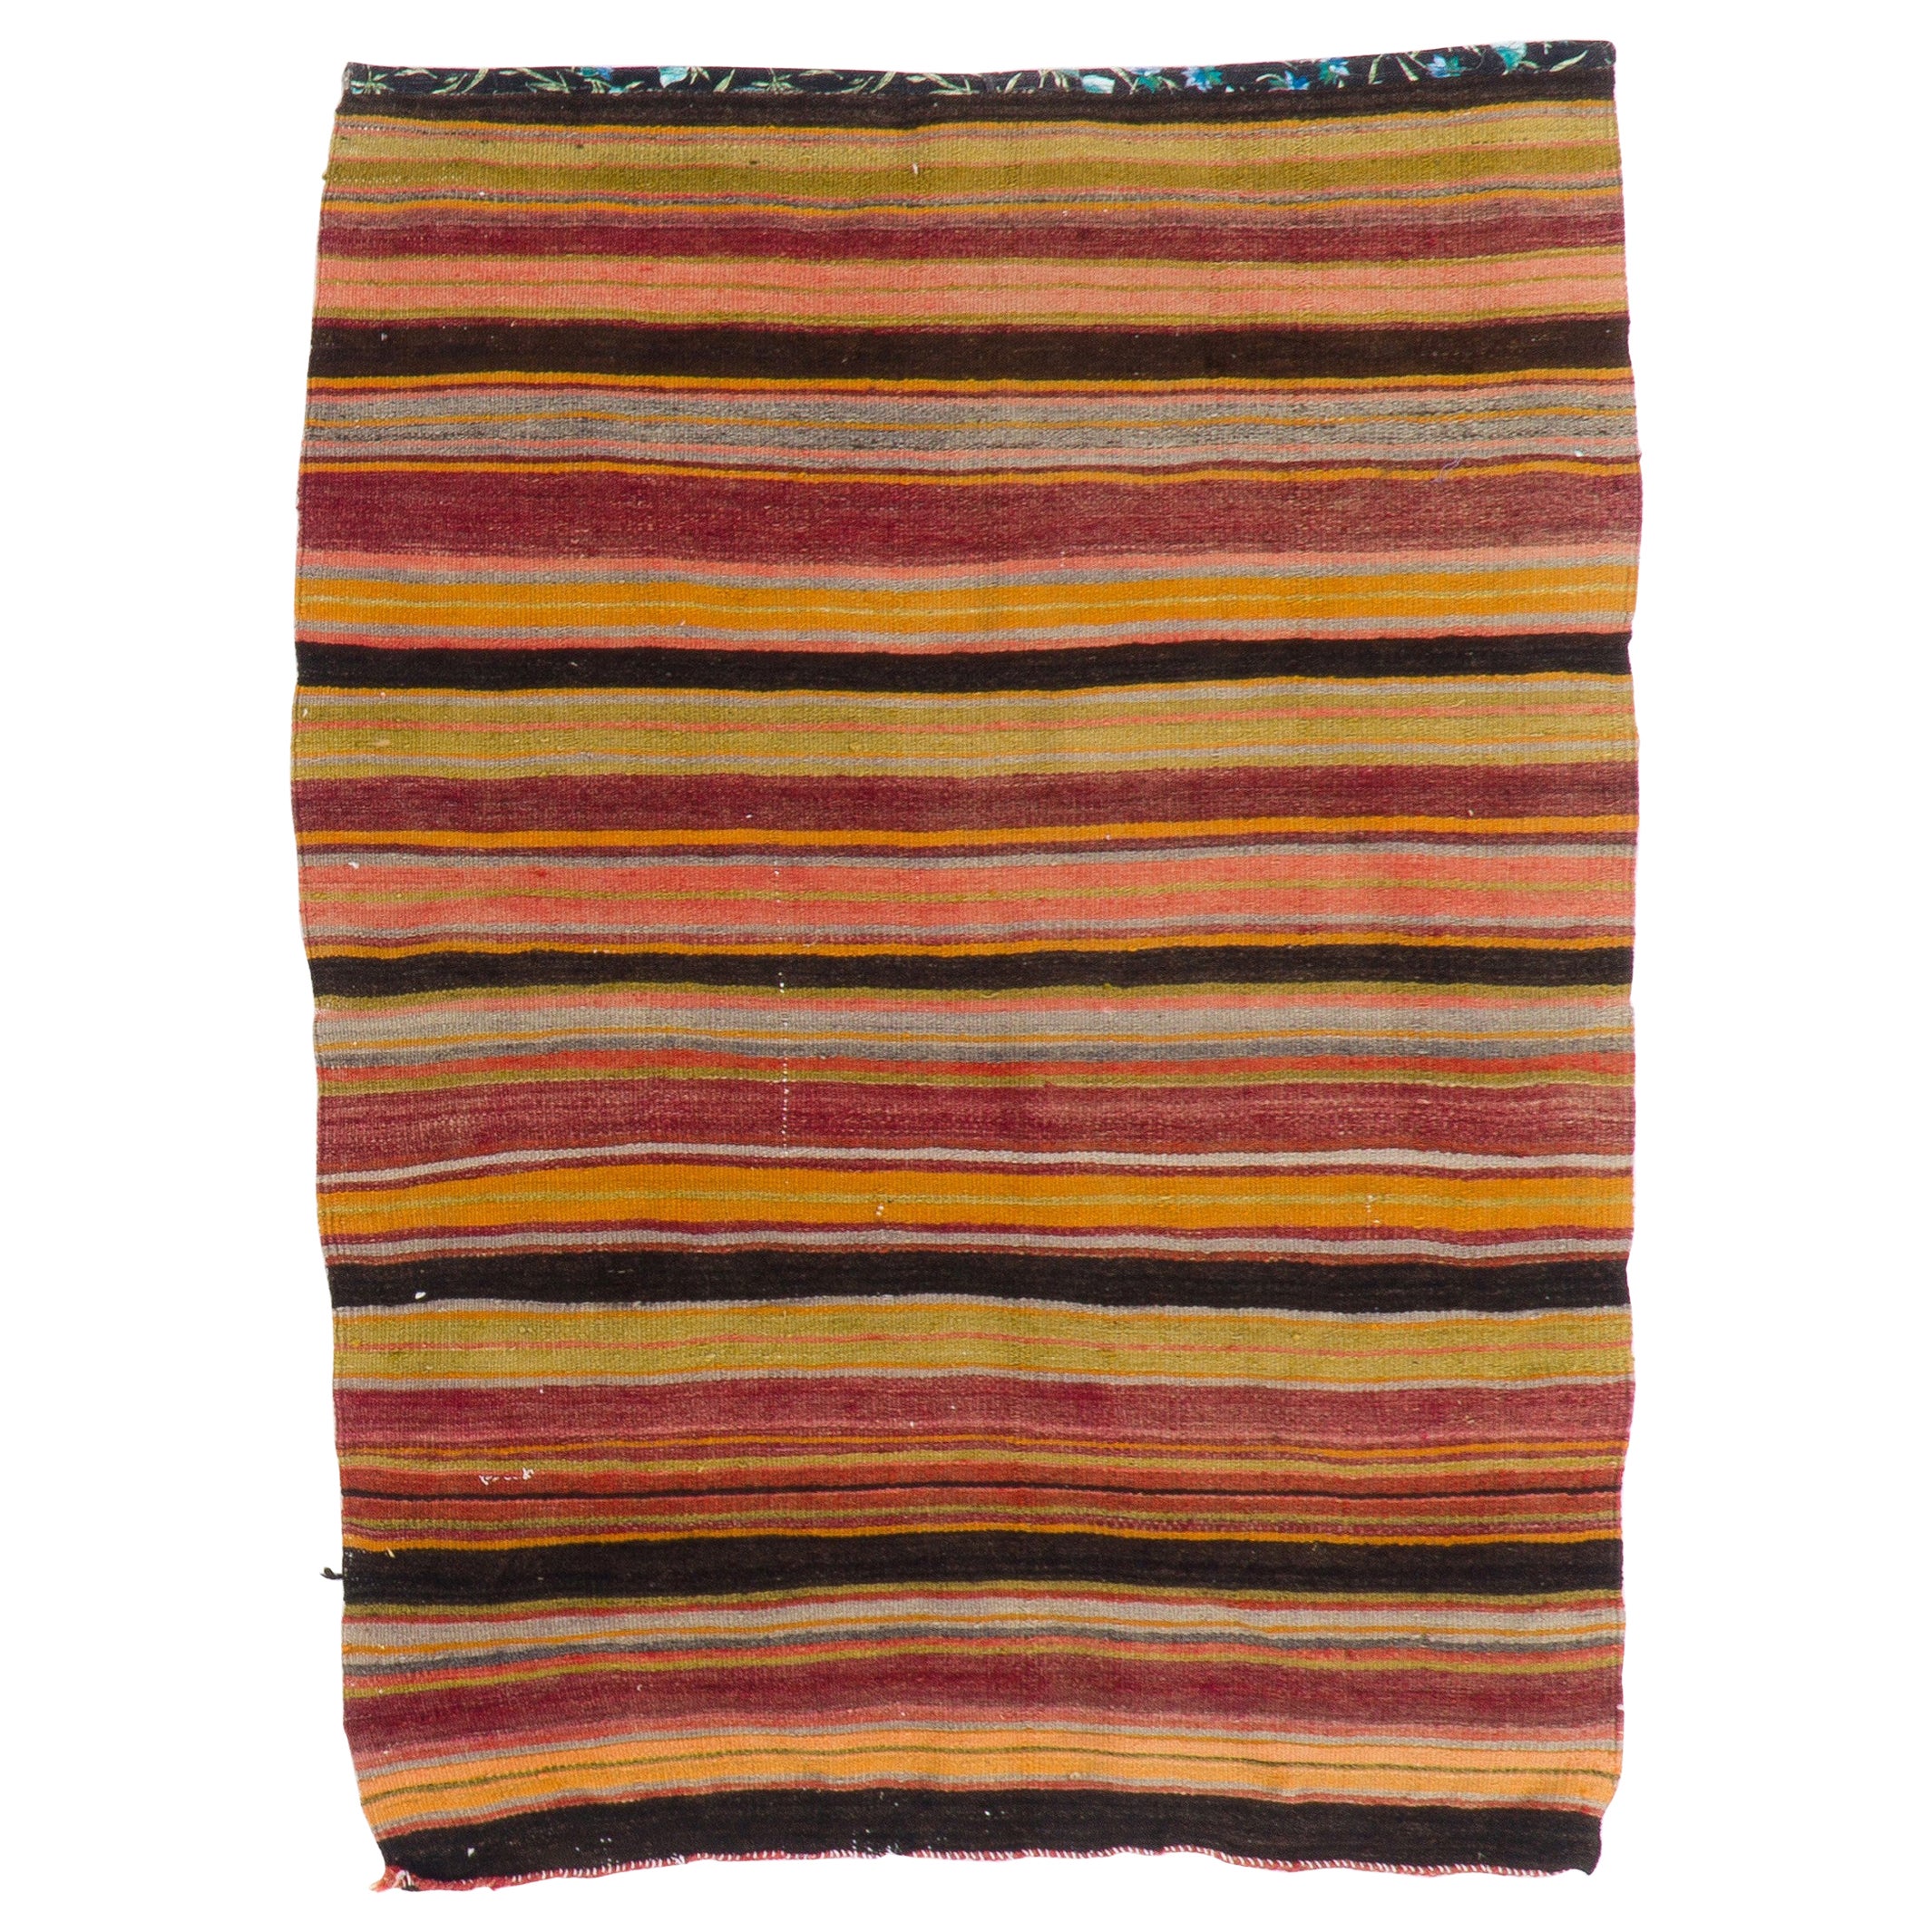 3.2x4.3 ft Vintage Striped Handwoven Turkish Wool Accent Kilim / Flat-Weave For Sale